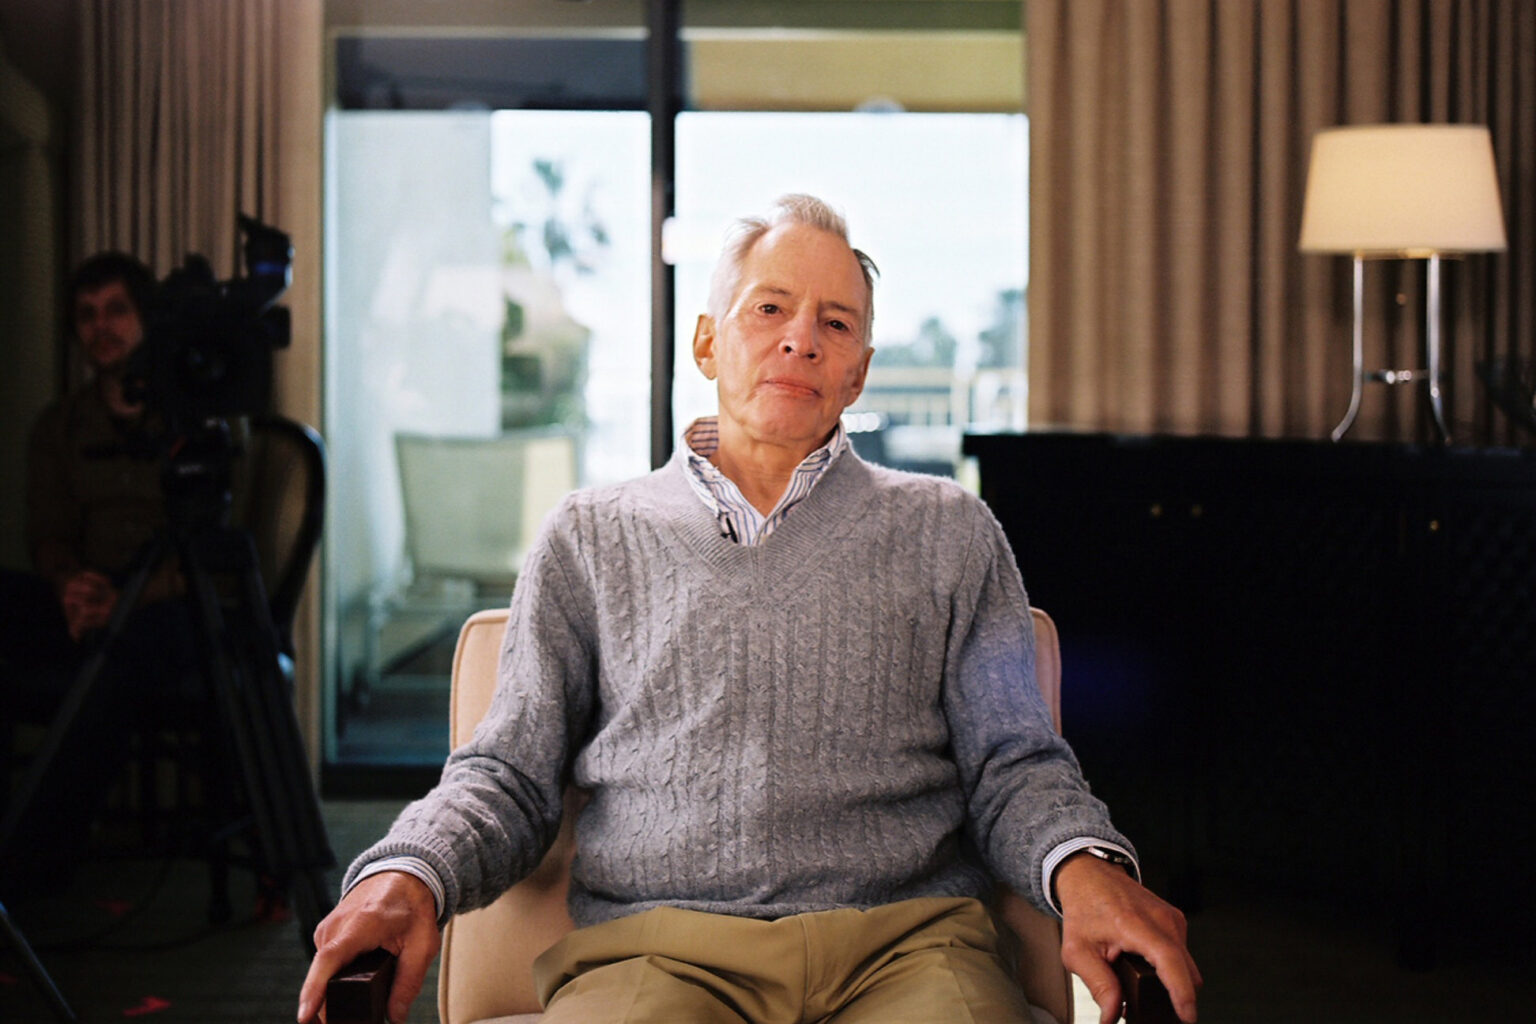 'The Jinx' on HBO made Robert Durst known across the globe. Rip open the story and see if the alleged murderer has finally been convicted of his crimes.